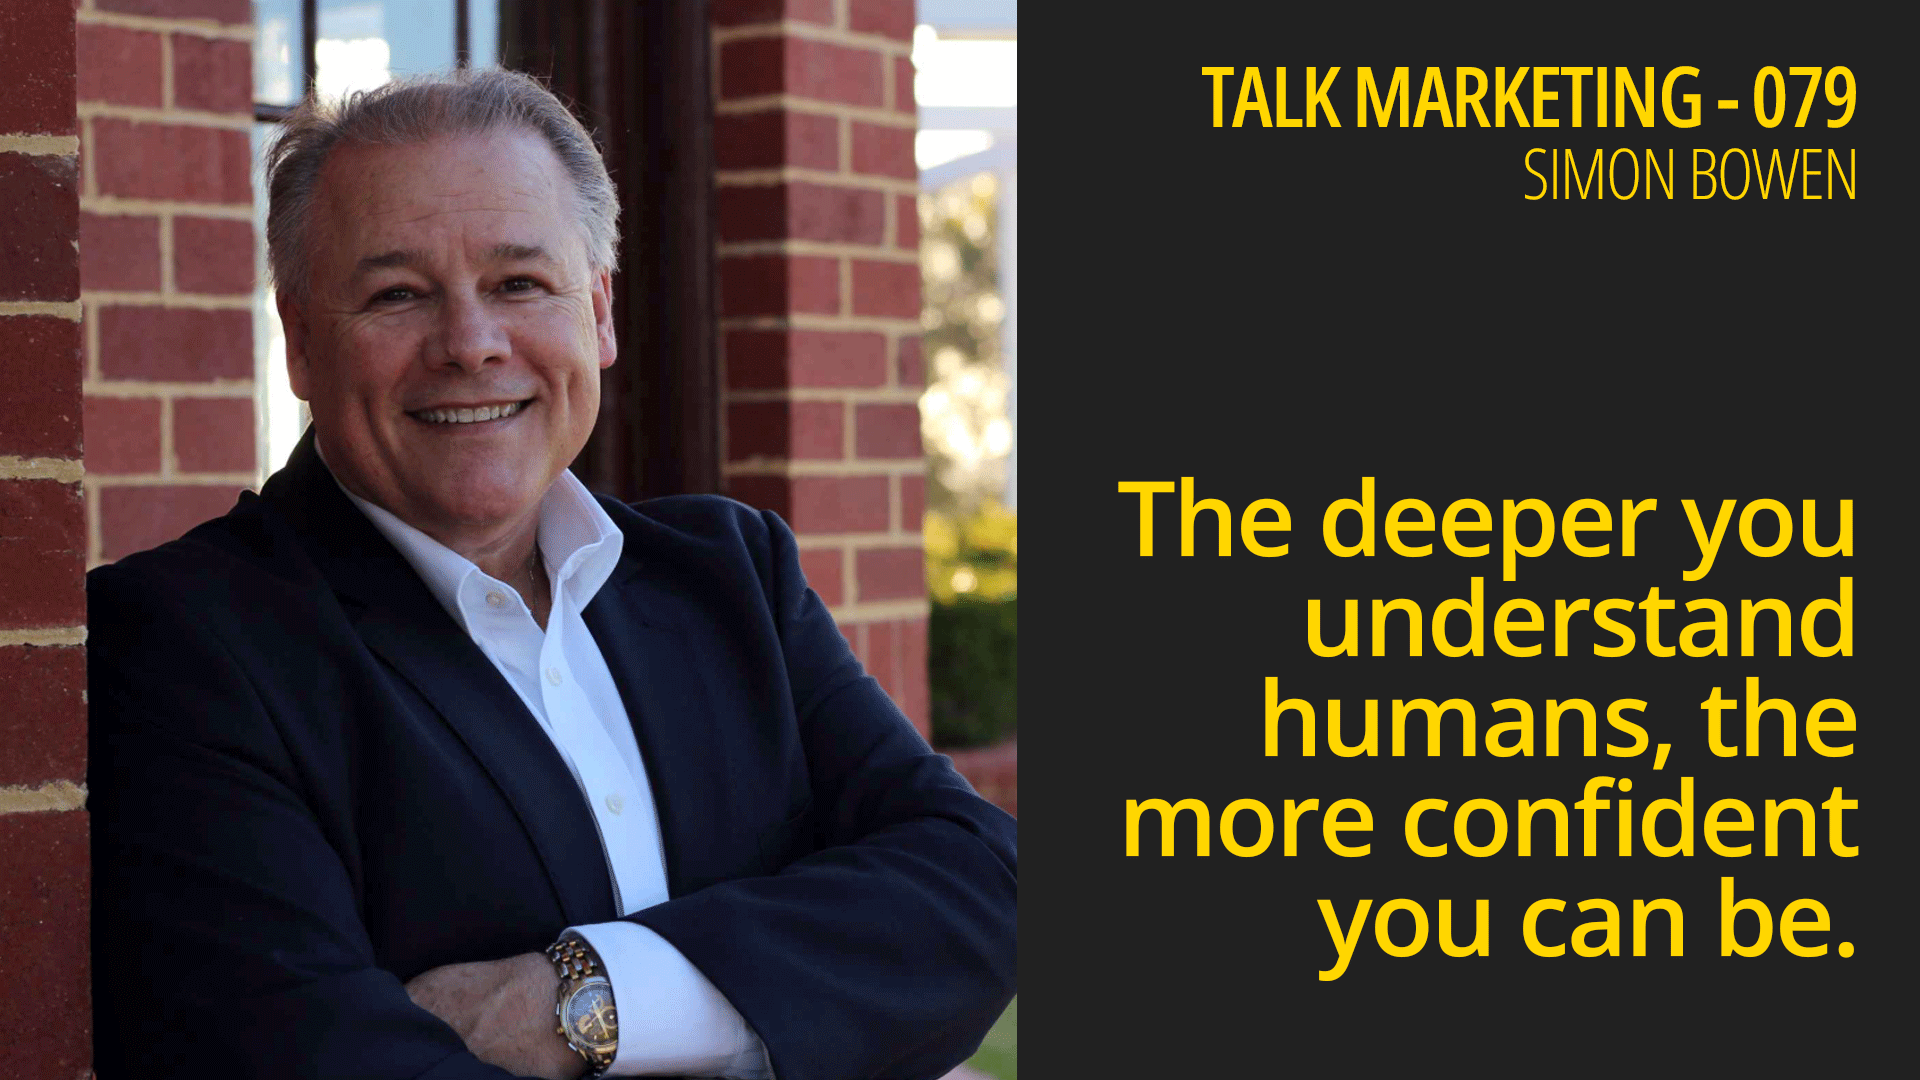 The deeper you understand humans, the more confident you can be – Talk Marketing 079 – Simon Bowen